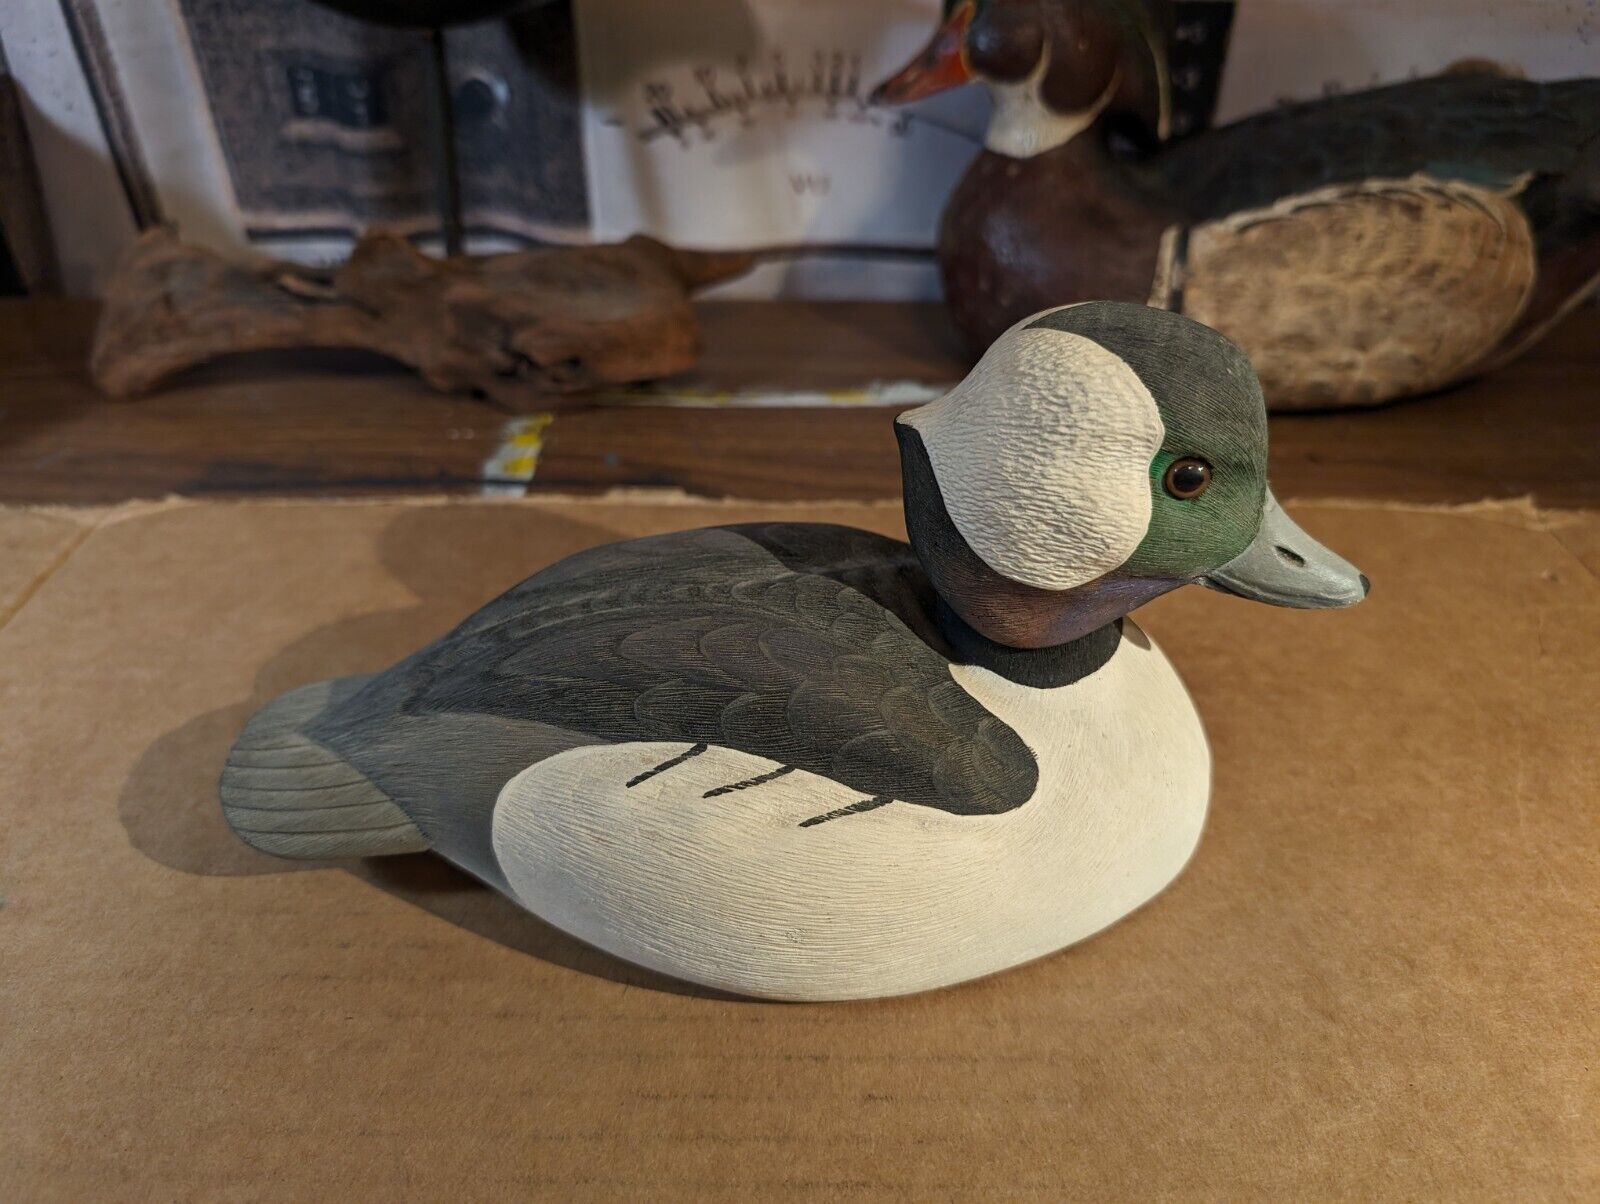 Bufflehead Drake decoy signed S. Hefner 1986 - hand carved and hand painted